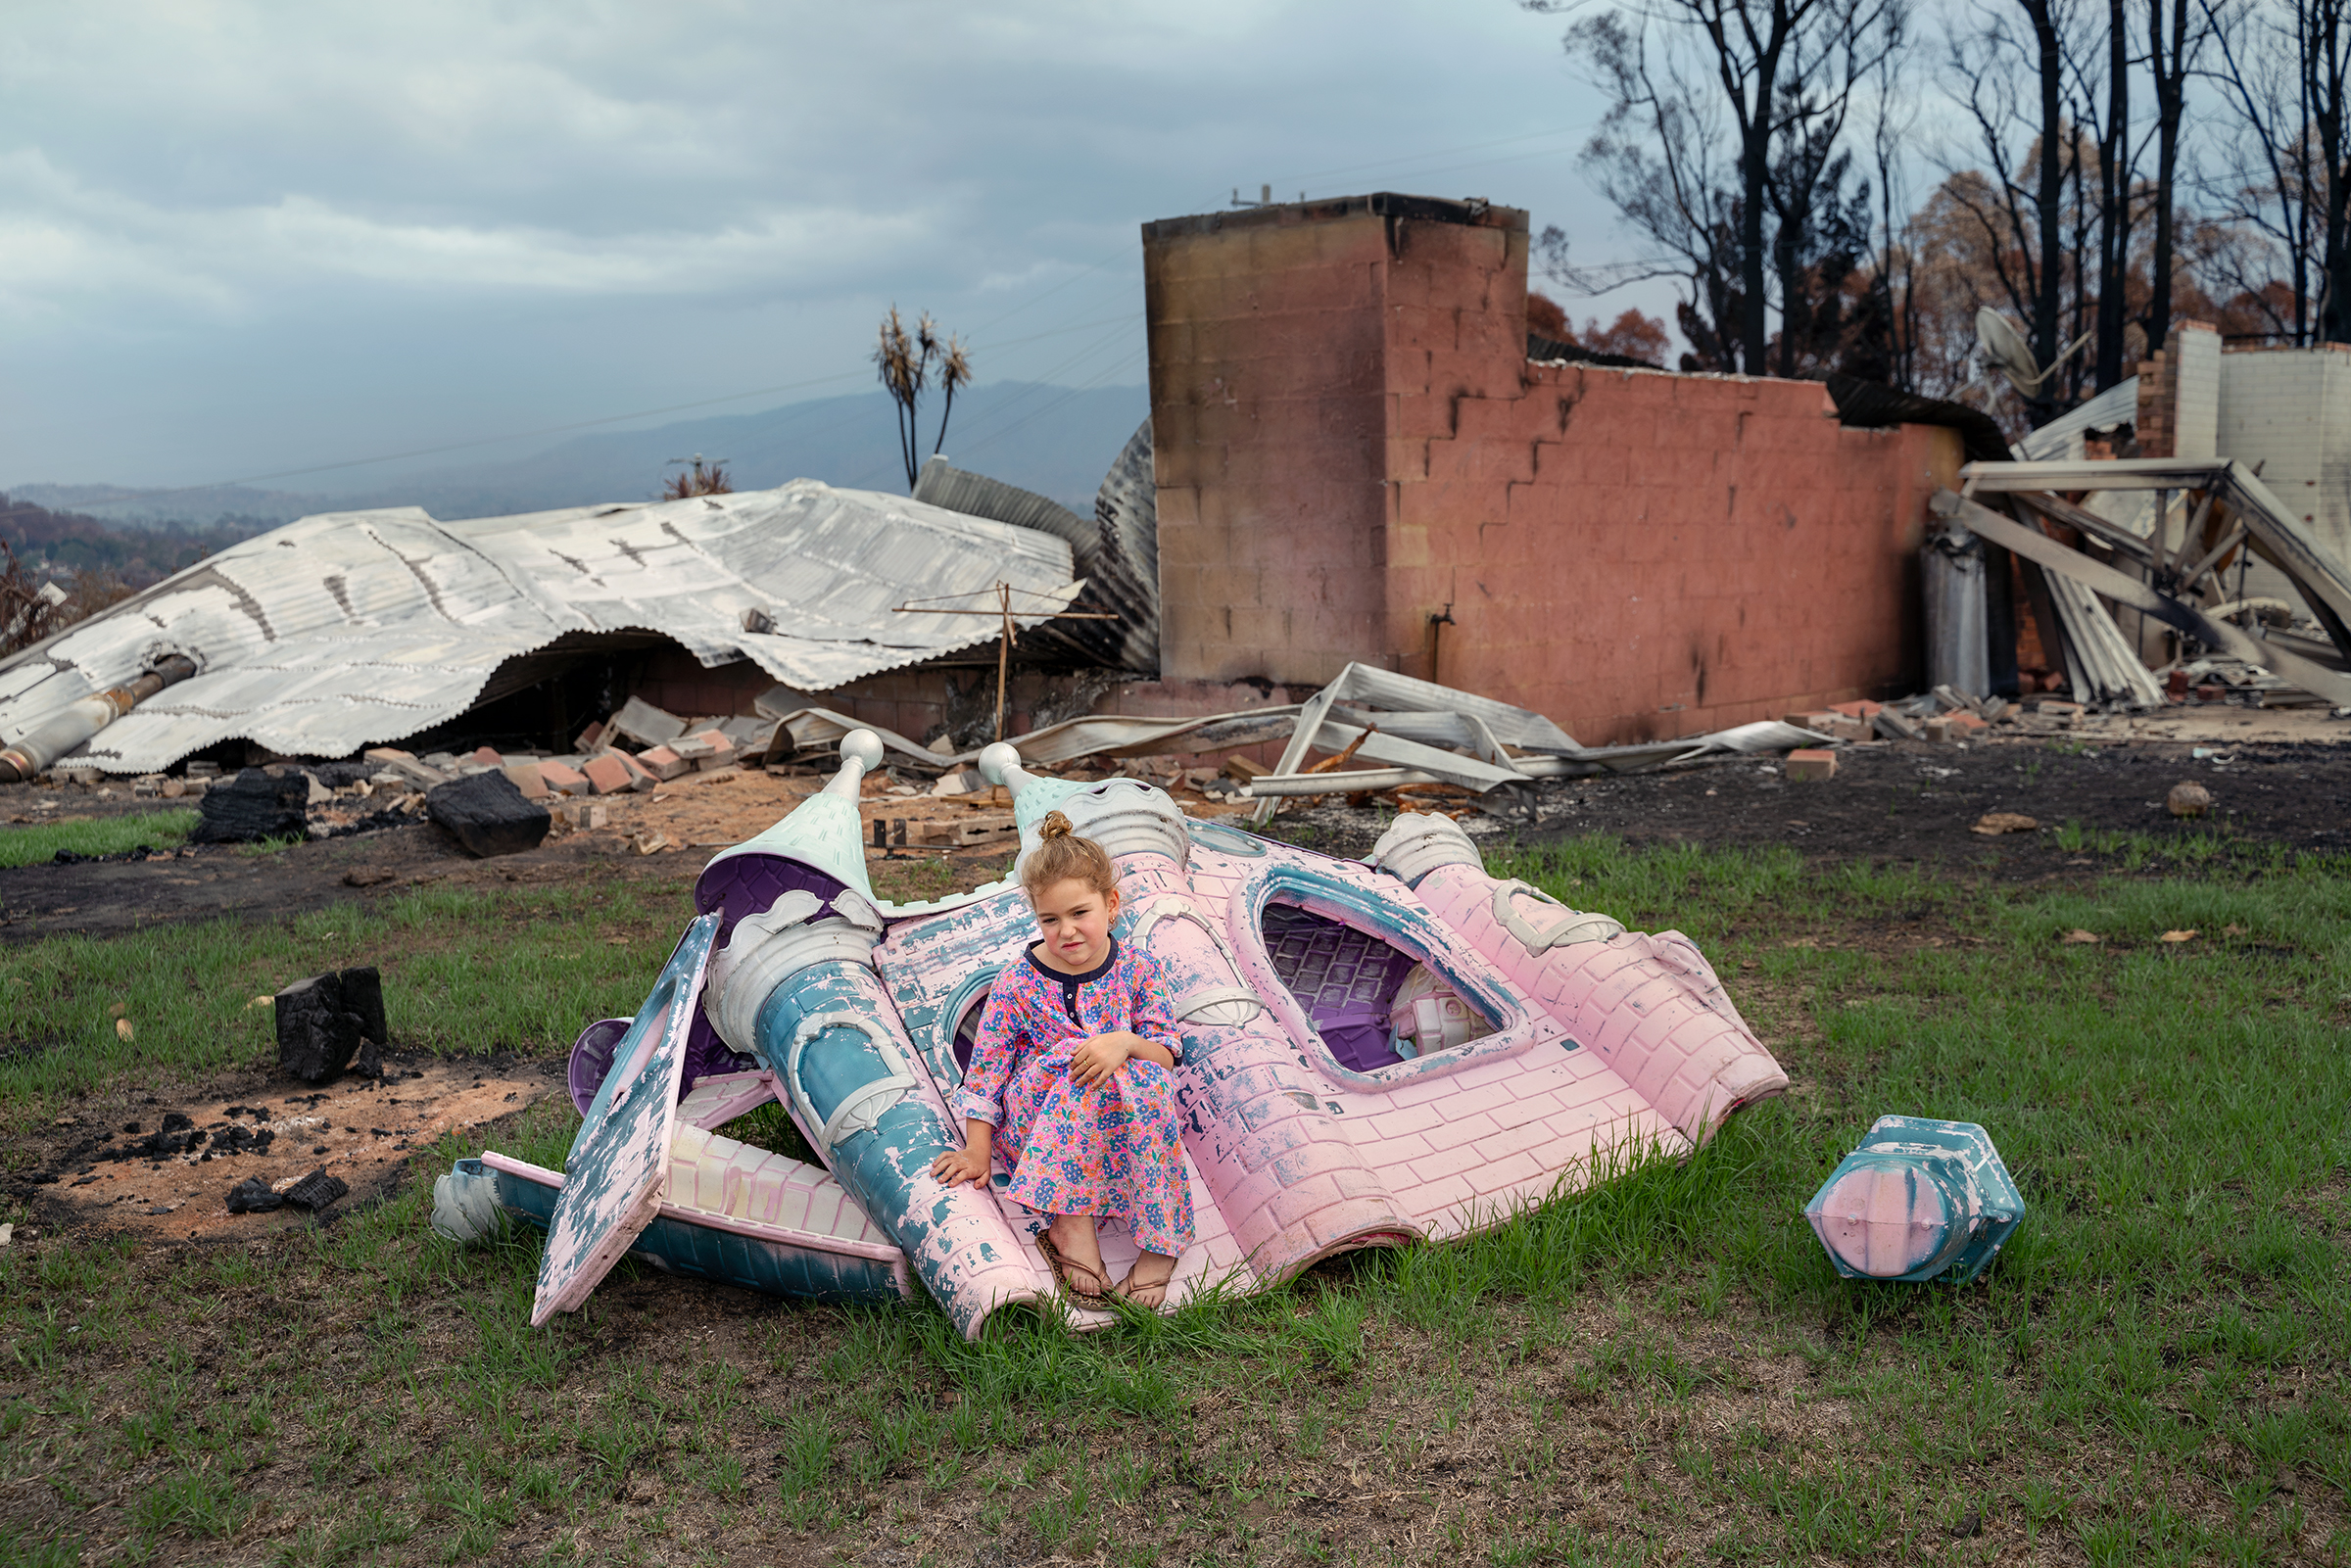 Sarah Rugendyke, 7, sits on a play castle that was <a href="https://time.com/longform/australia-wildfires-bush-pictures/" target="_blank" rel="noopener noreferrer">burned on her family’s property</a> in Cobargo on Jan. 20; an out-of-control bushfire devastated the tourist town about 240 miles south of Sydney on New Year’s Eve. (Adam Ferguson for TIME)